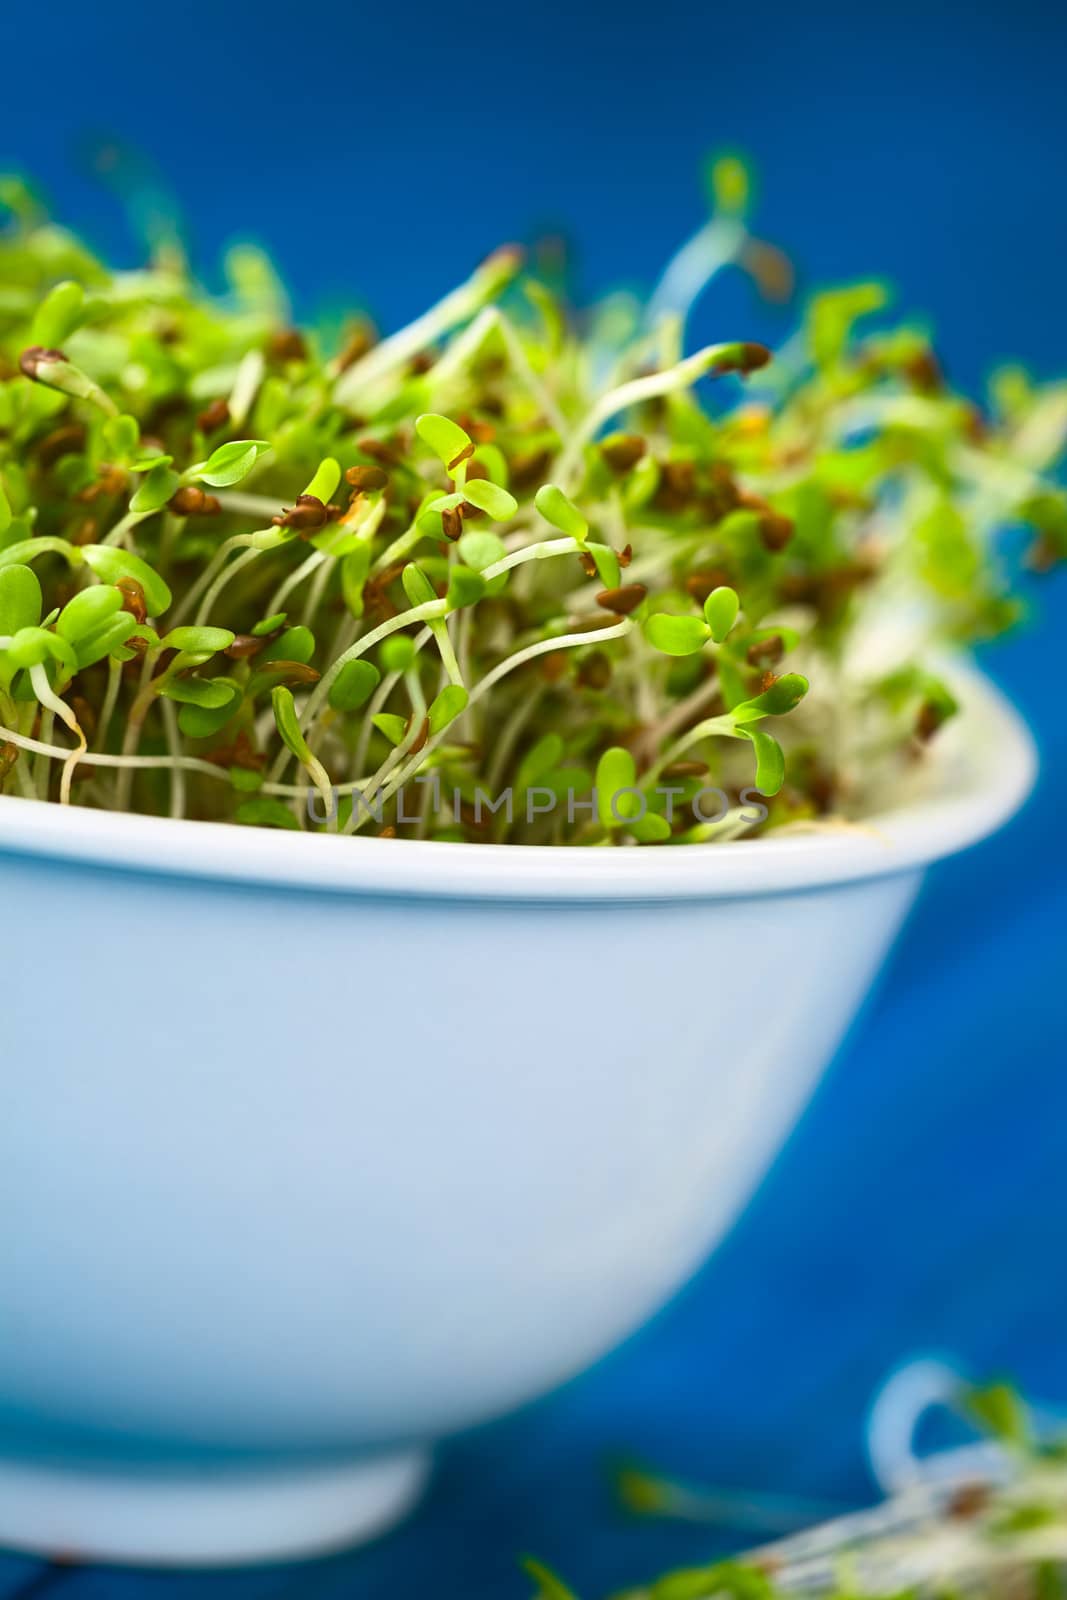 Sprouted alfalfa seeds in white bowl (Very Shallow Depth of Field, Focus on some of the sprouts in the front)